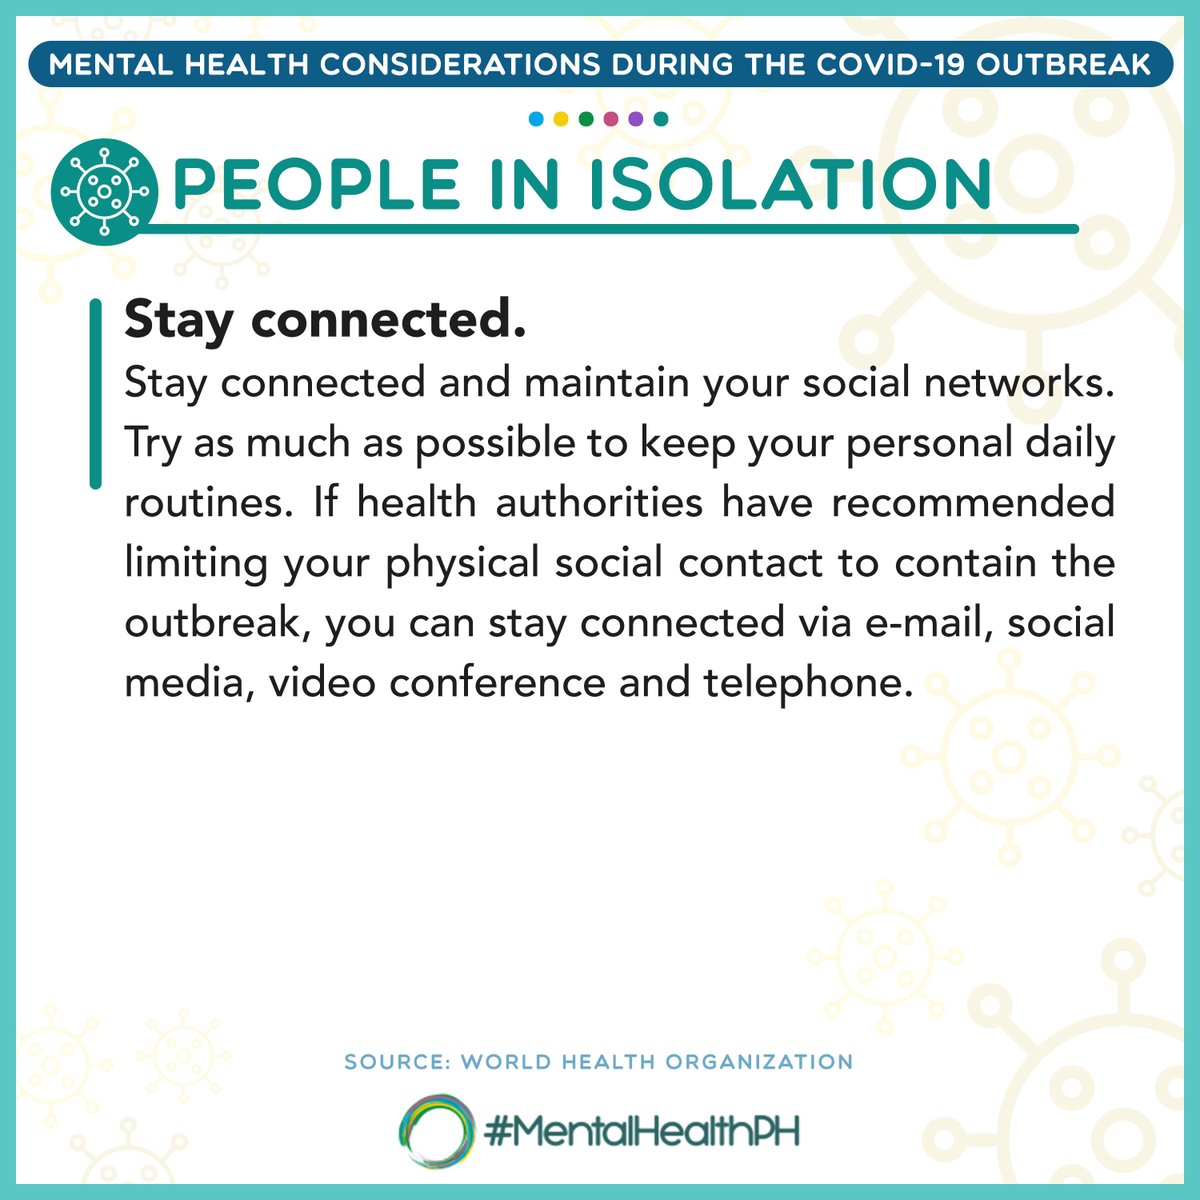 [Mental Health Considerations during COVID-19 Outbreak]For People in Isolation #MentalHealthPH  #COVID19(Source:  @WHO) @WHOPhilippines  @gospeakyourmind  @UnitedGMH